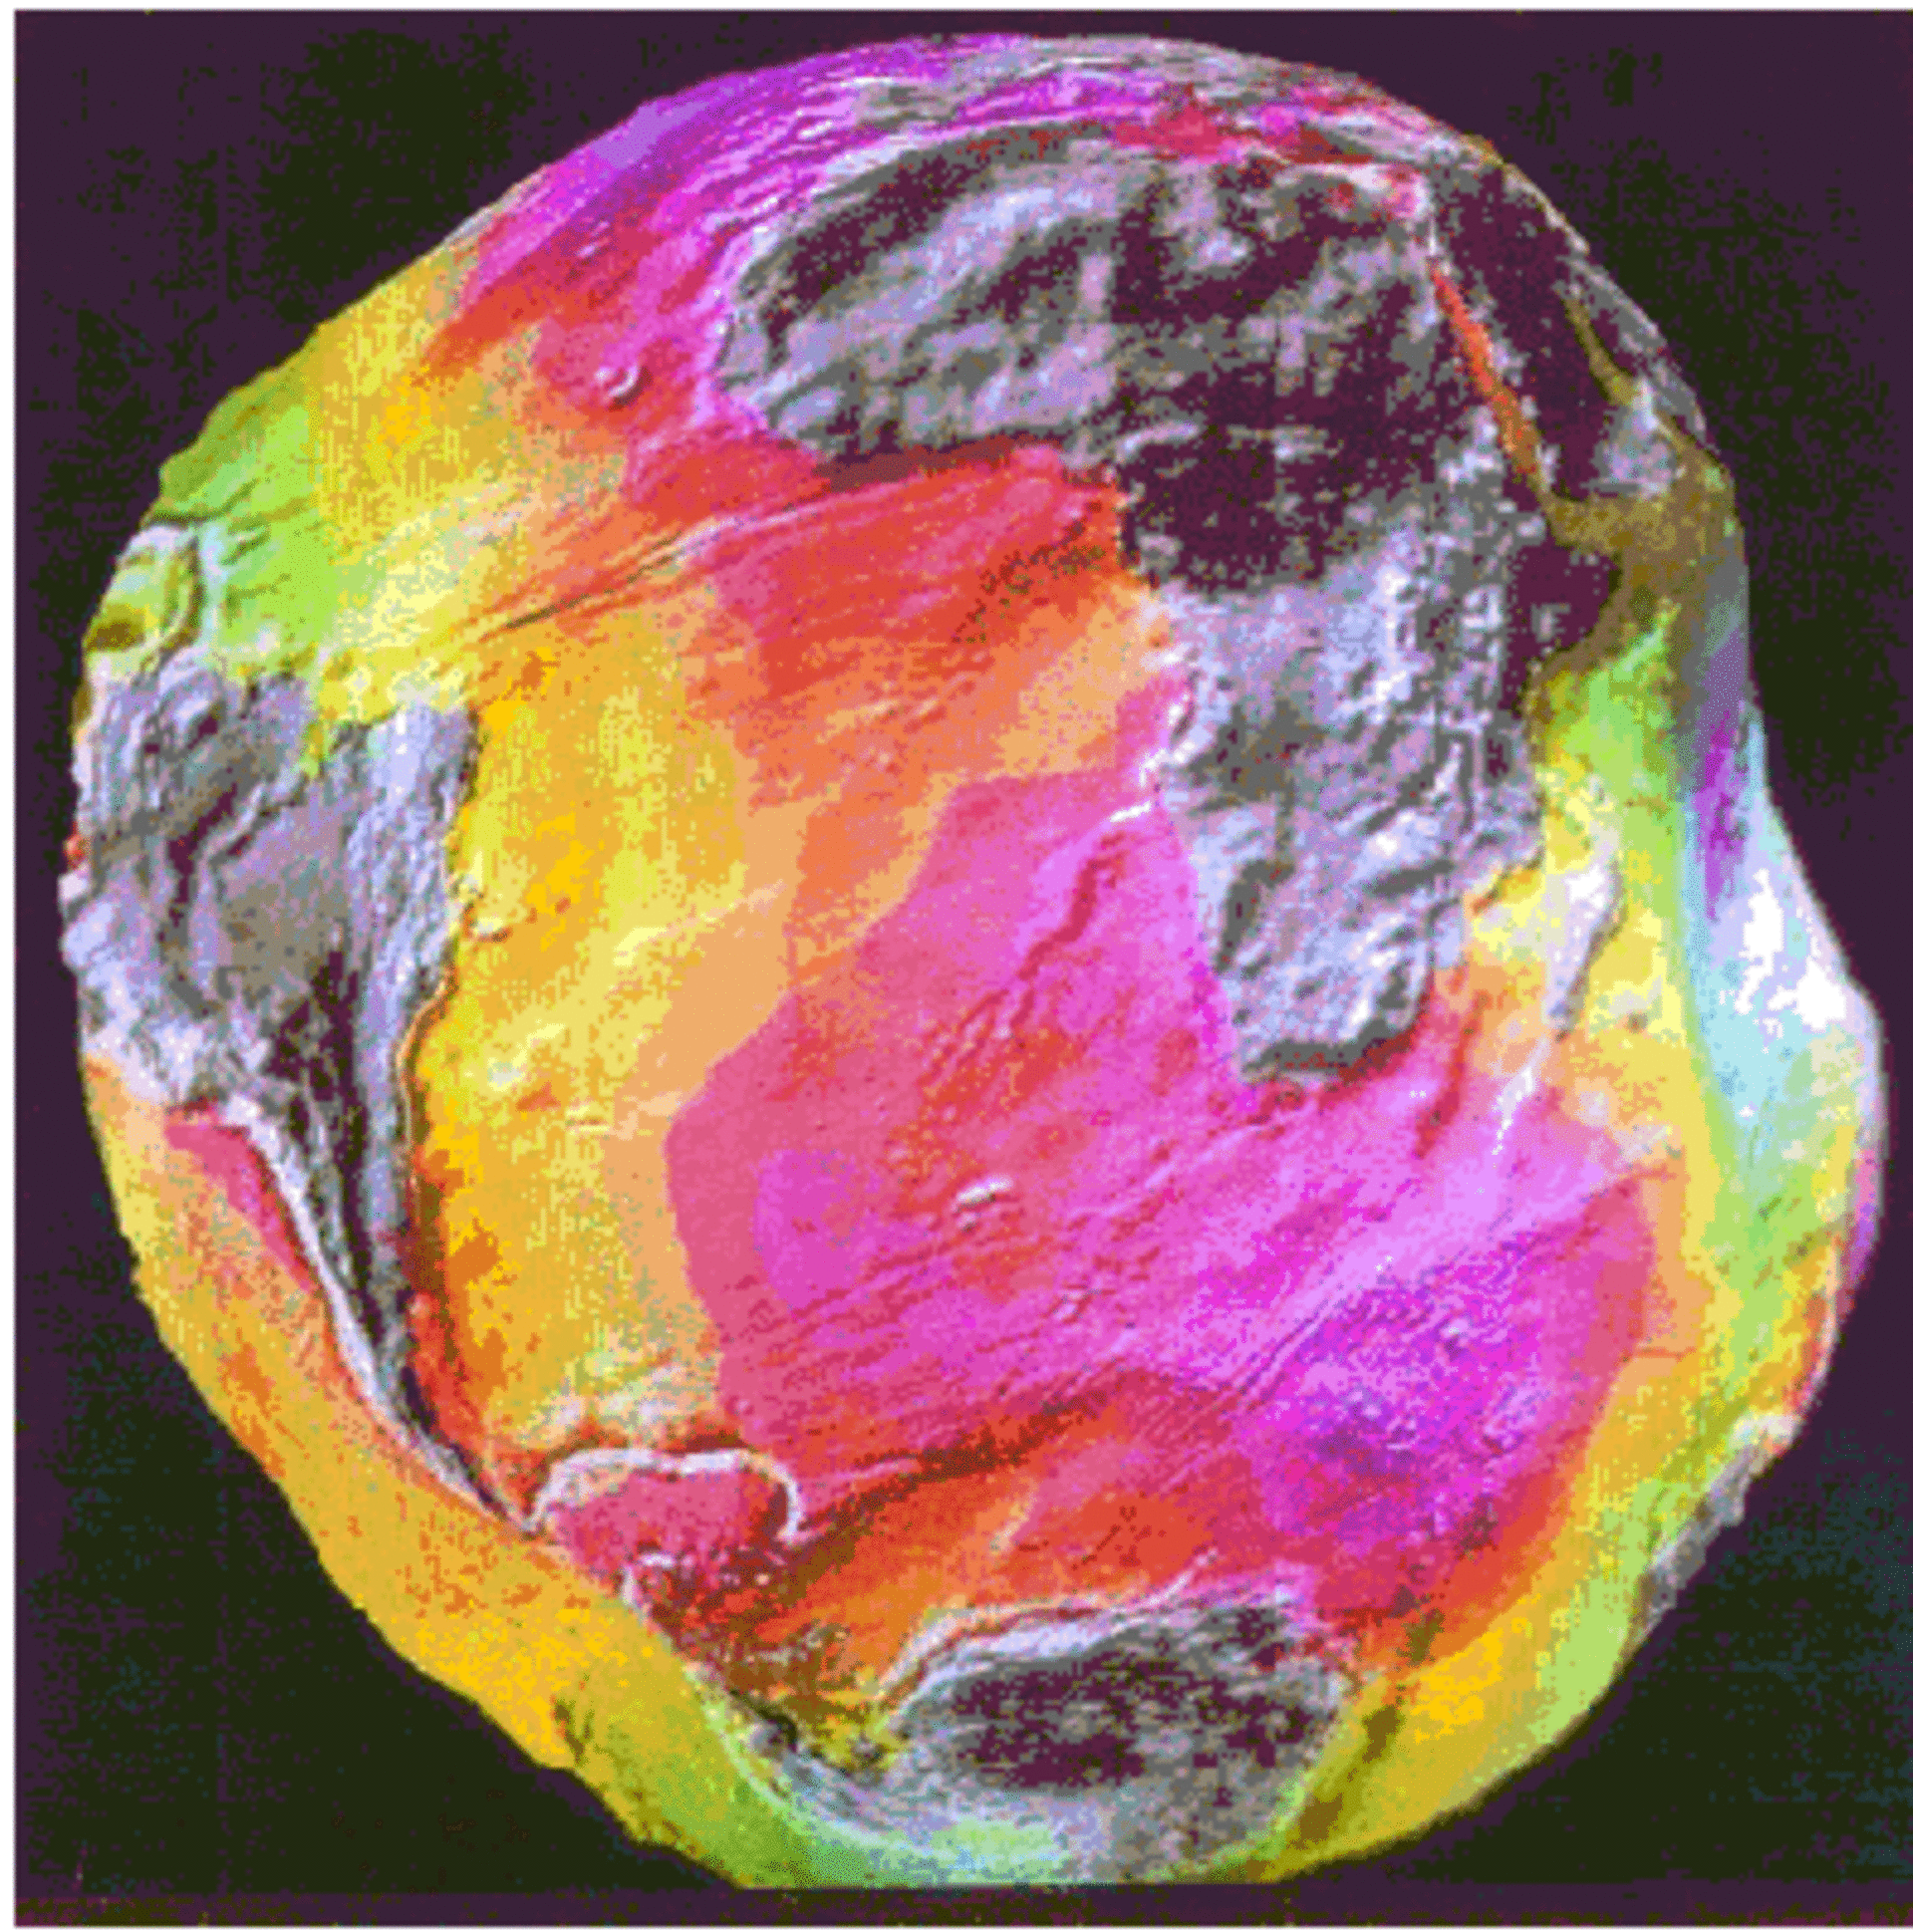 Amplified view of the Earth's geoid